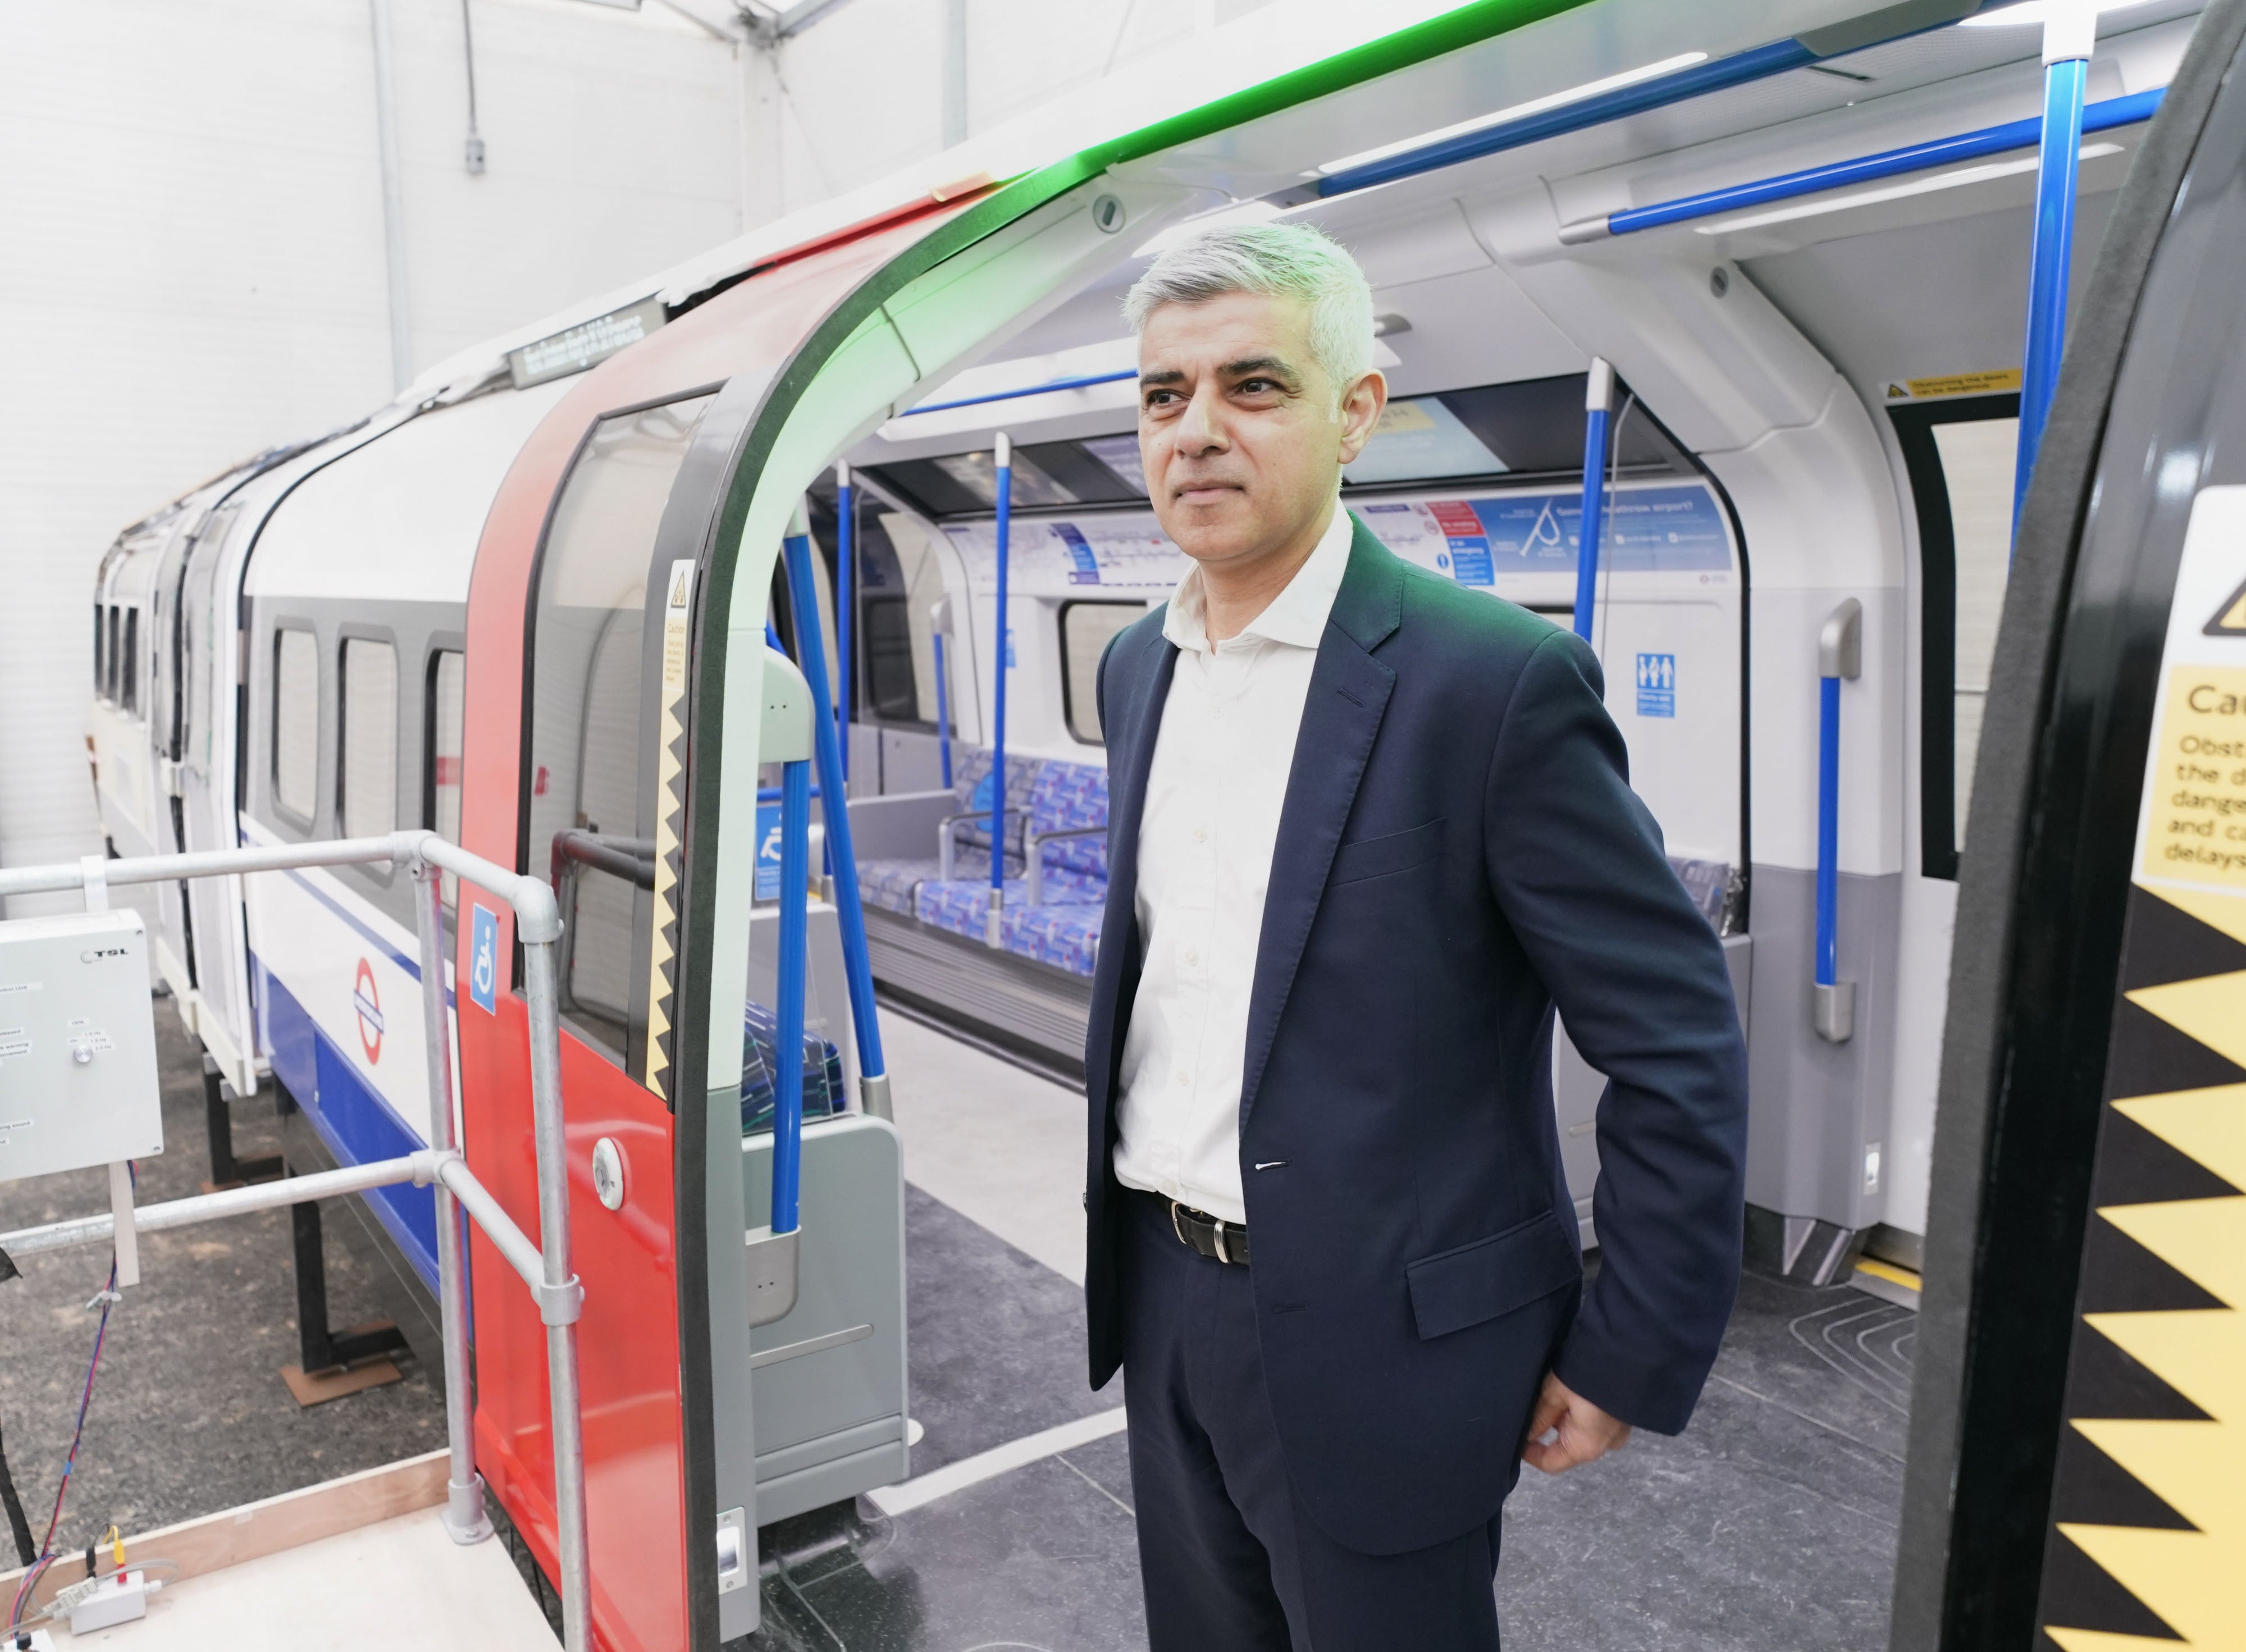 Future contracts for London transport schemes which support jobs across the country are at risk without long-term funding from the Government, the capital’s mayor is warning (Danny Lawson/PA)